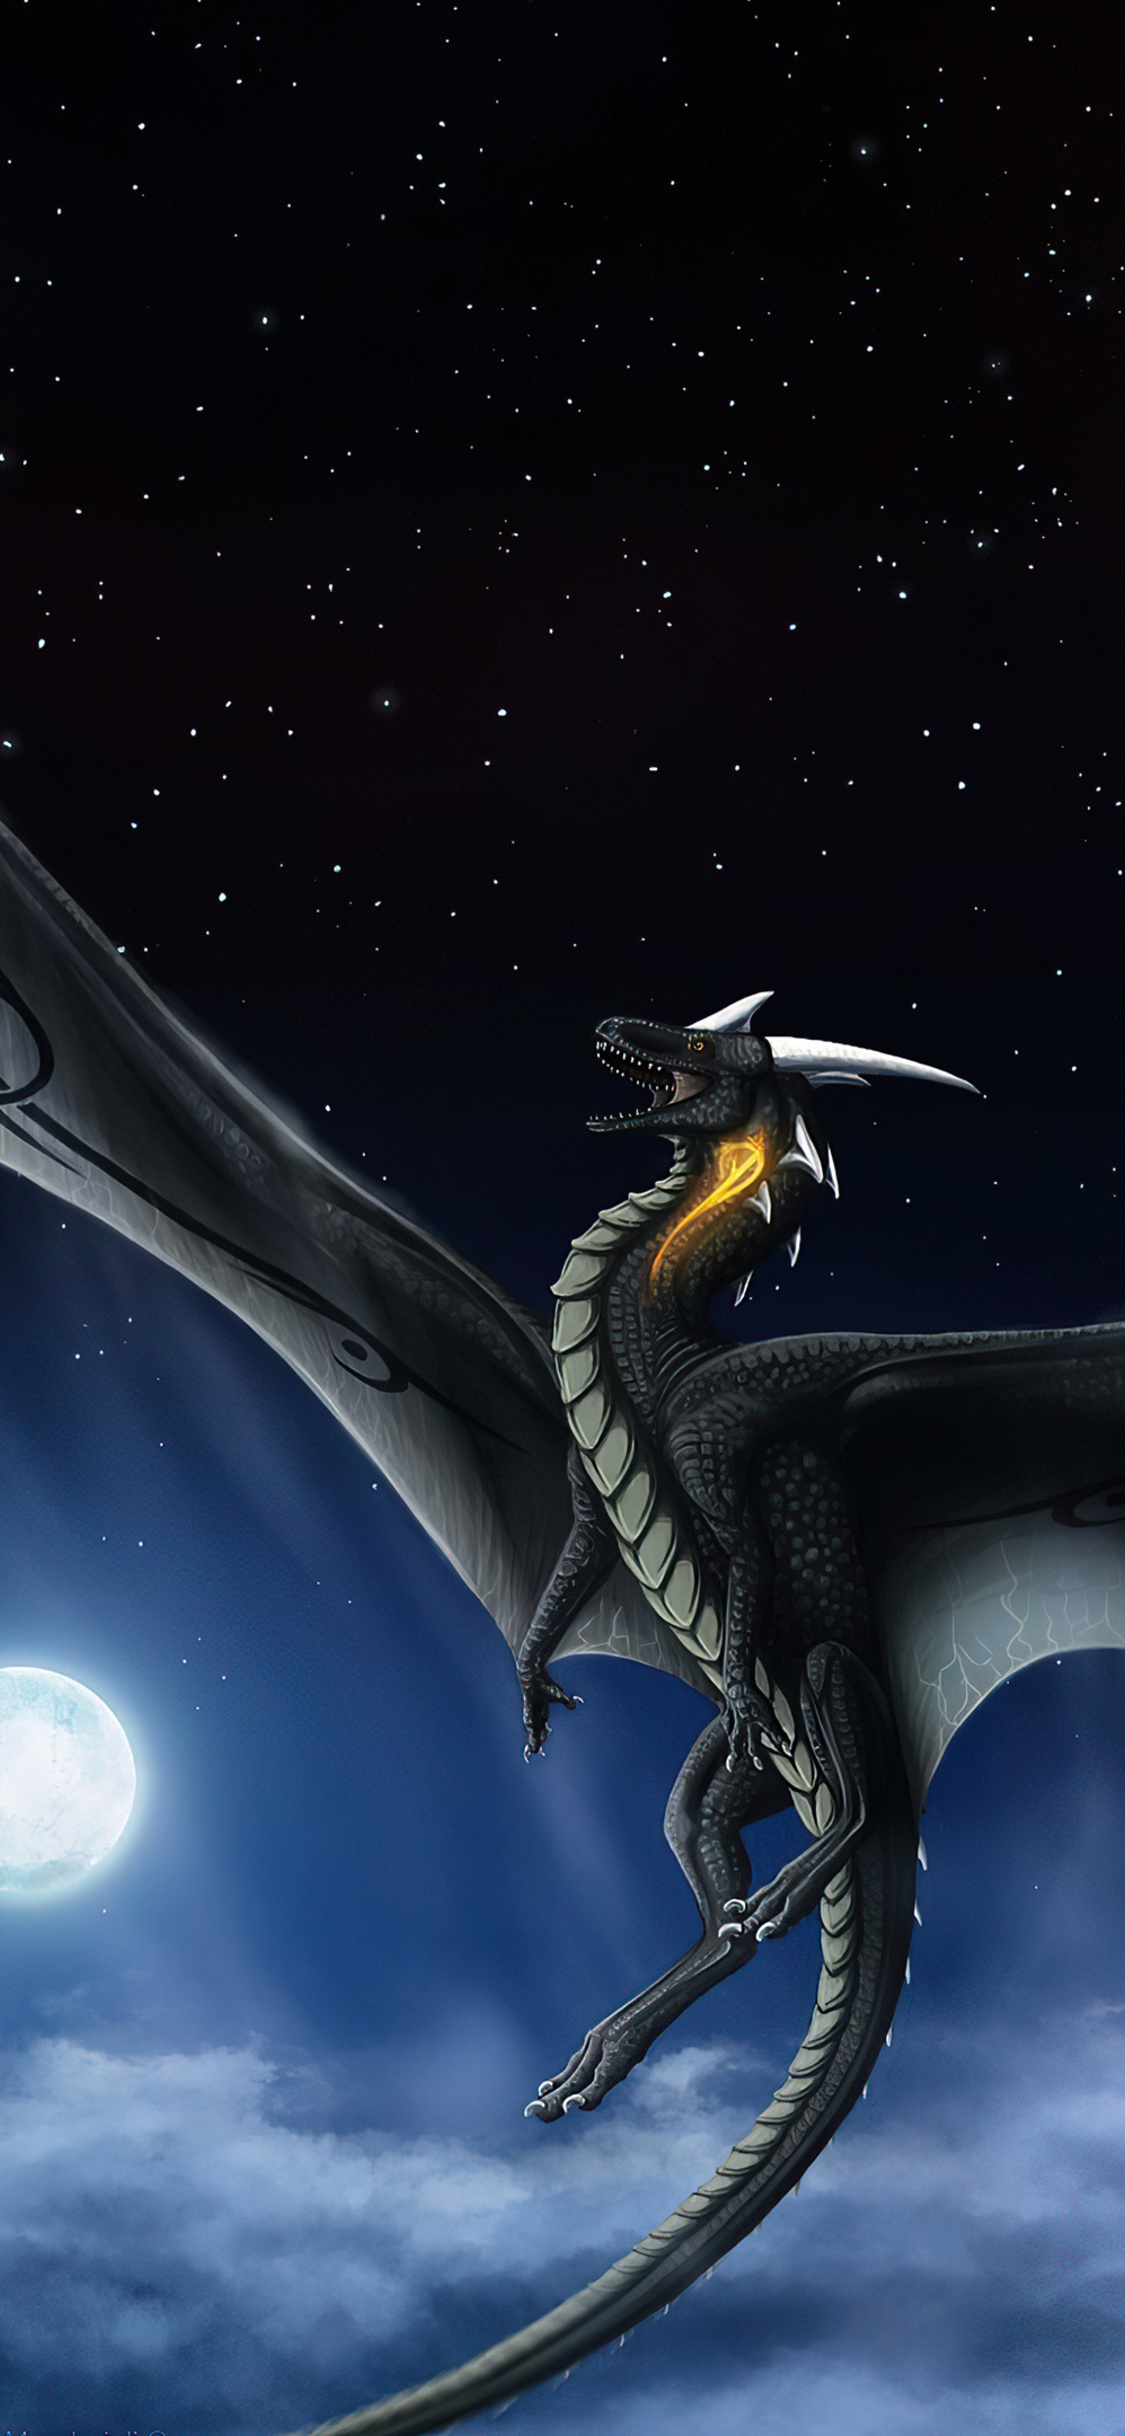 Moon Dragon Night 4k iPhone XS, iPhone iPhone X HD 4k Wallpaper, Image, Background, Photo and Picture